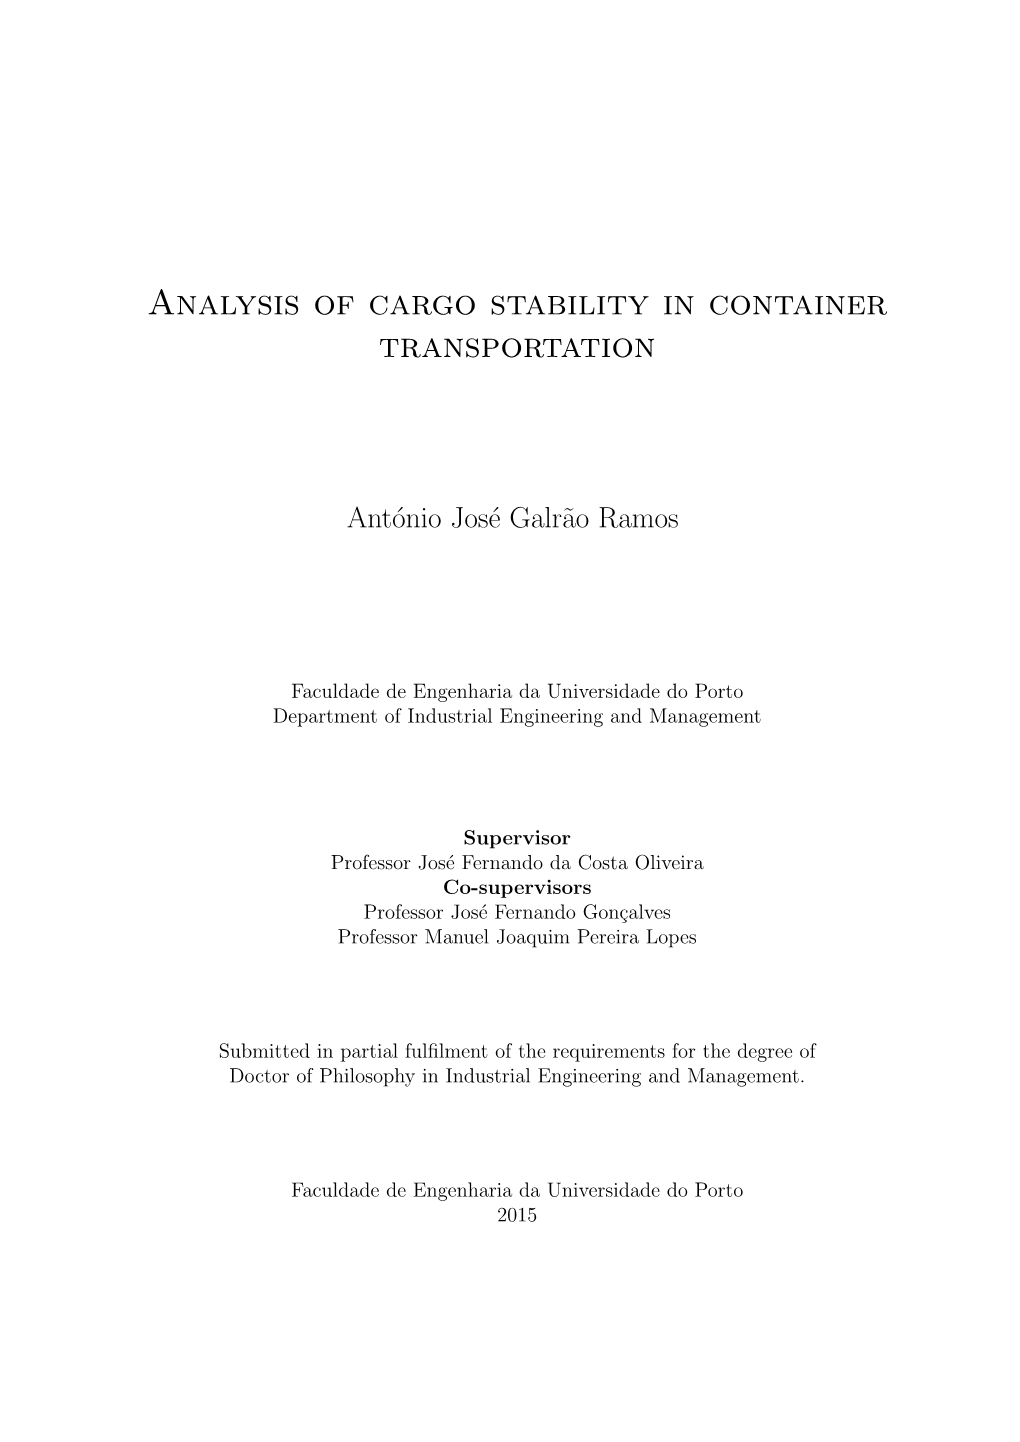 Analysis of Cargo Stability in Container Transportation